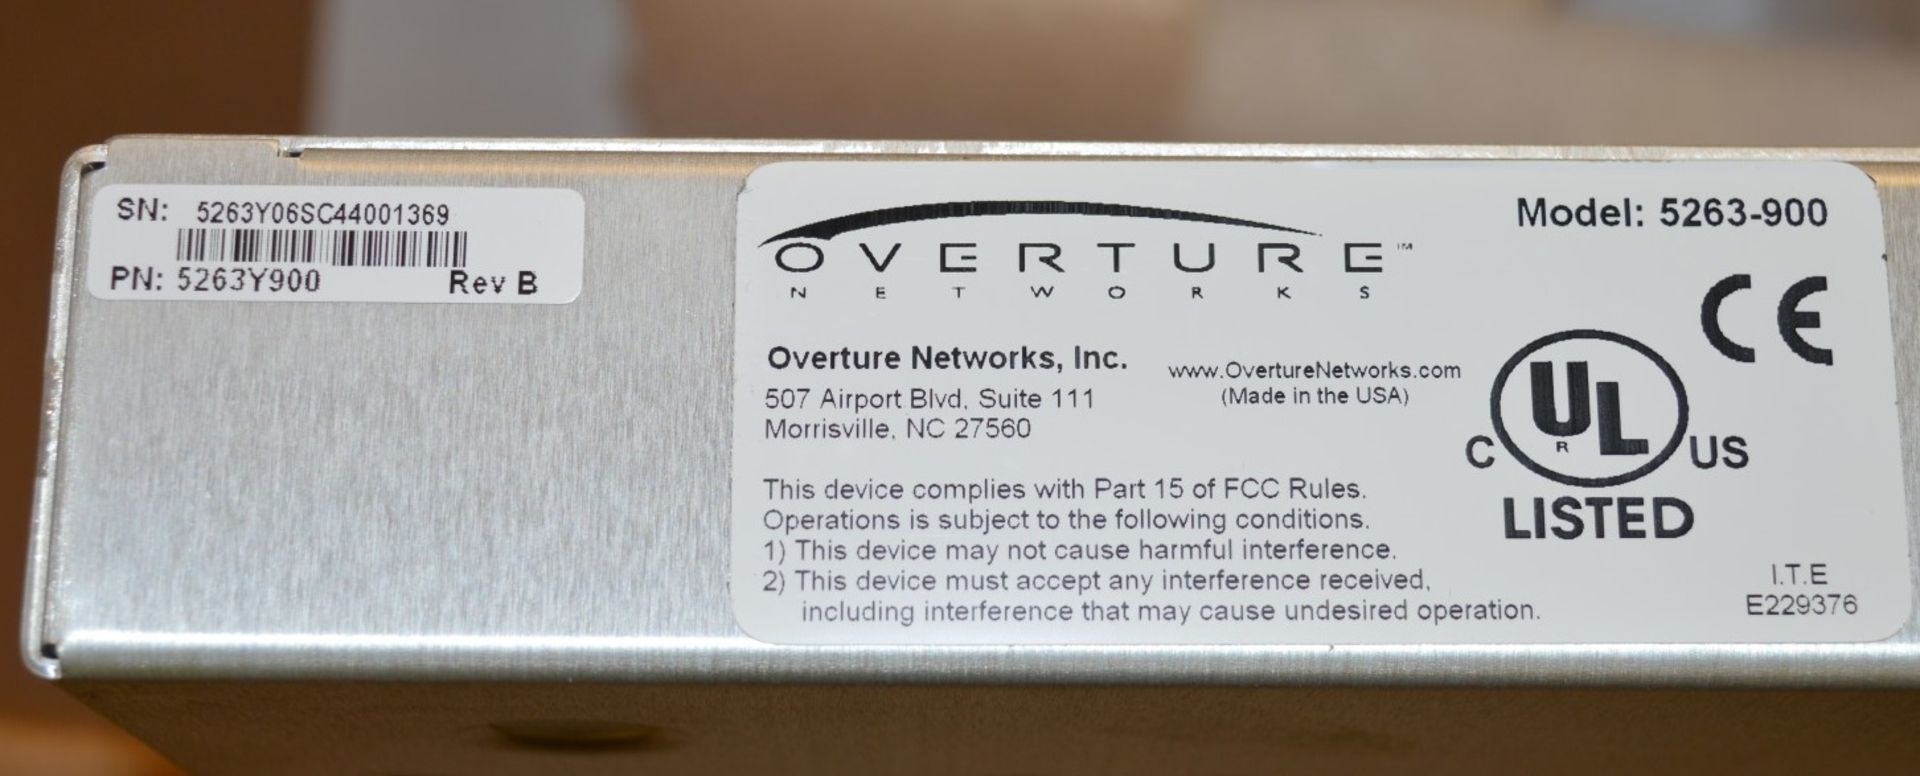 1 x Overture Networks ISG 180 Carrier Ethernet Over T1/E1 Edge - Model 5262-930A - Brand New and - Image 9 of 11